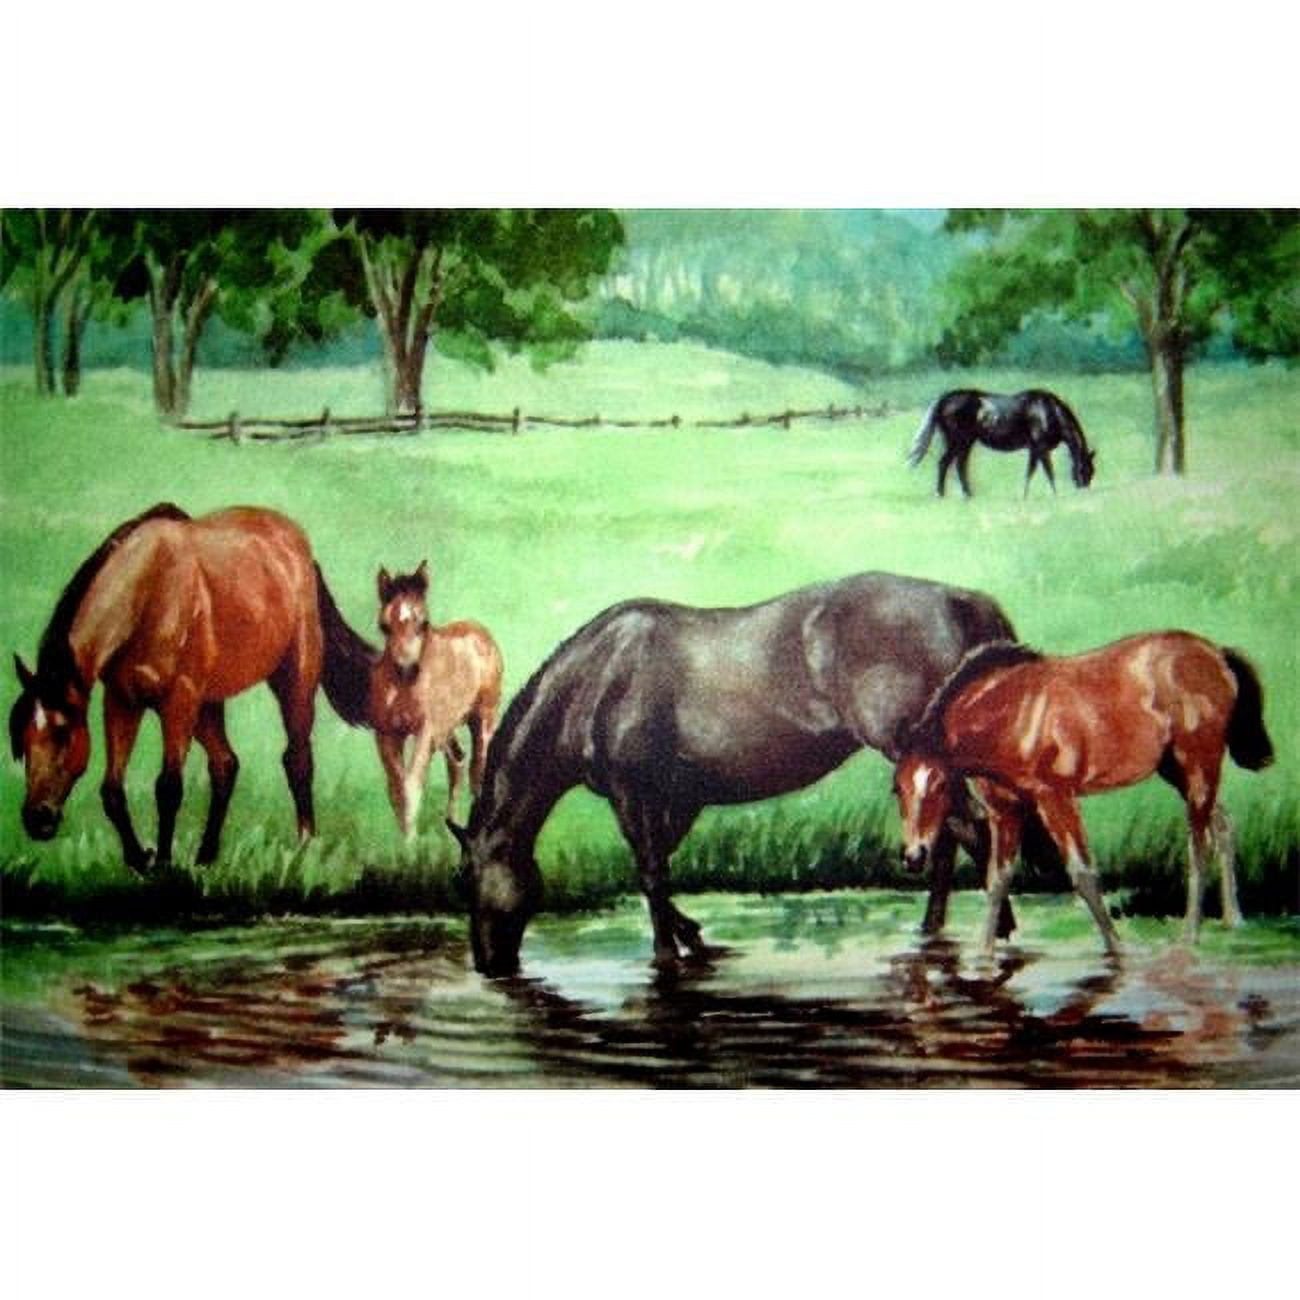 Awv065 Horse Pond Doormat Rug, Green - 18 X 30 In.